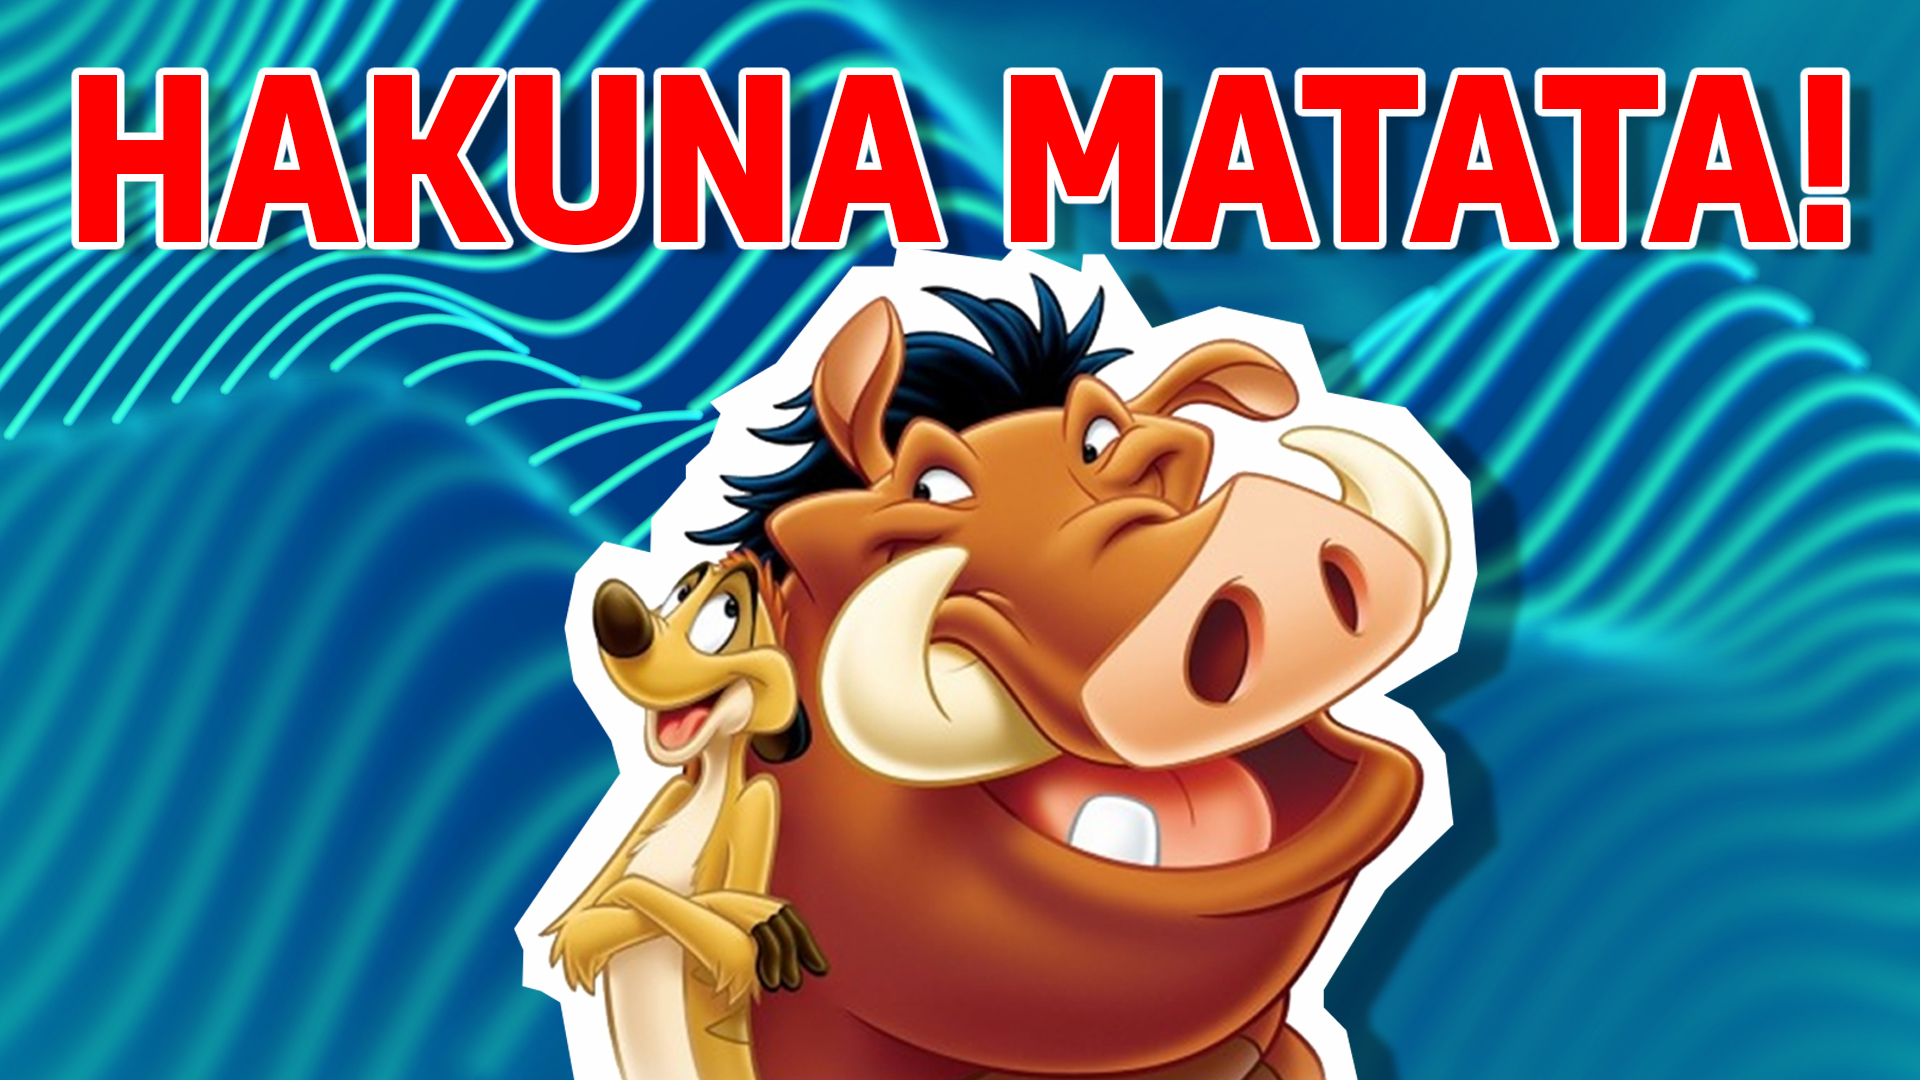 Timon and Pumbaa from The Lion King